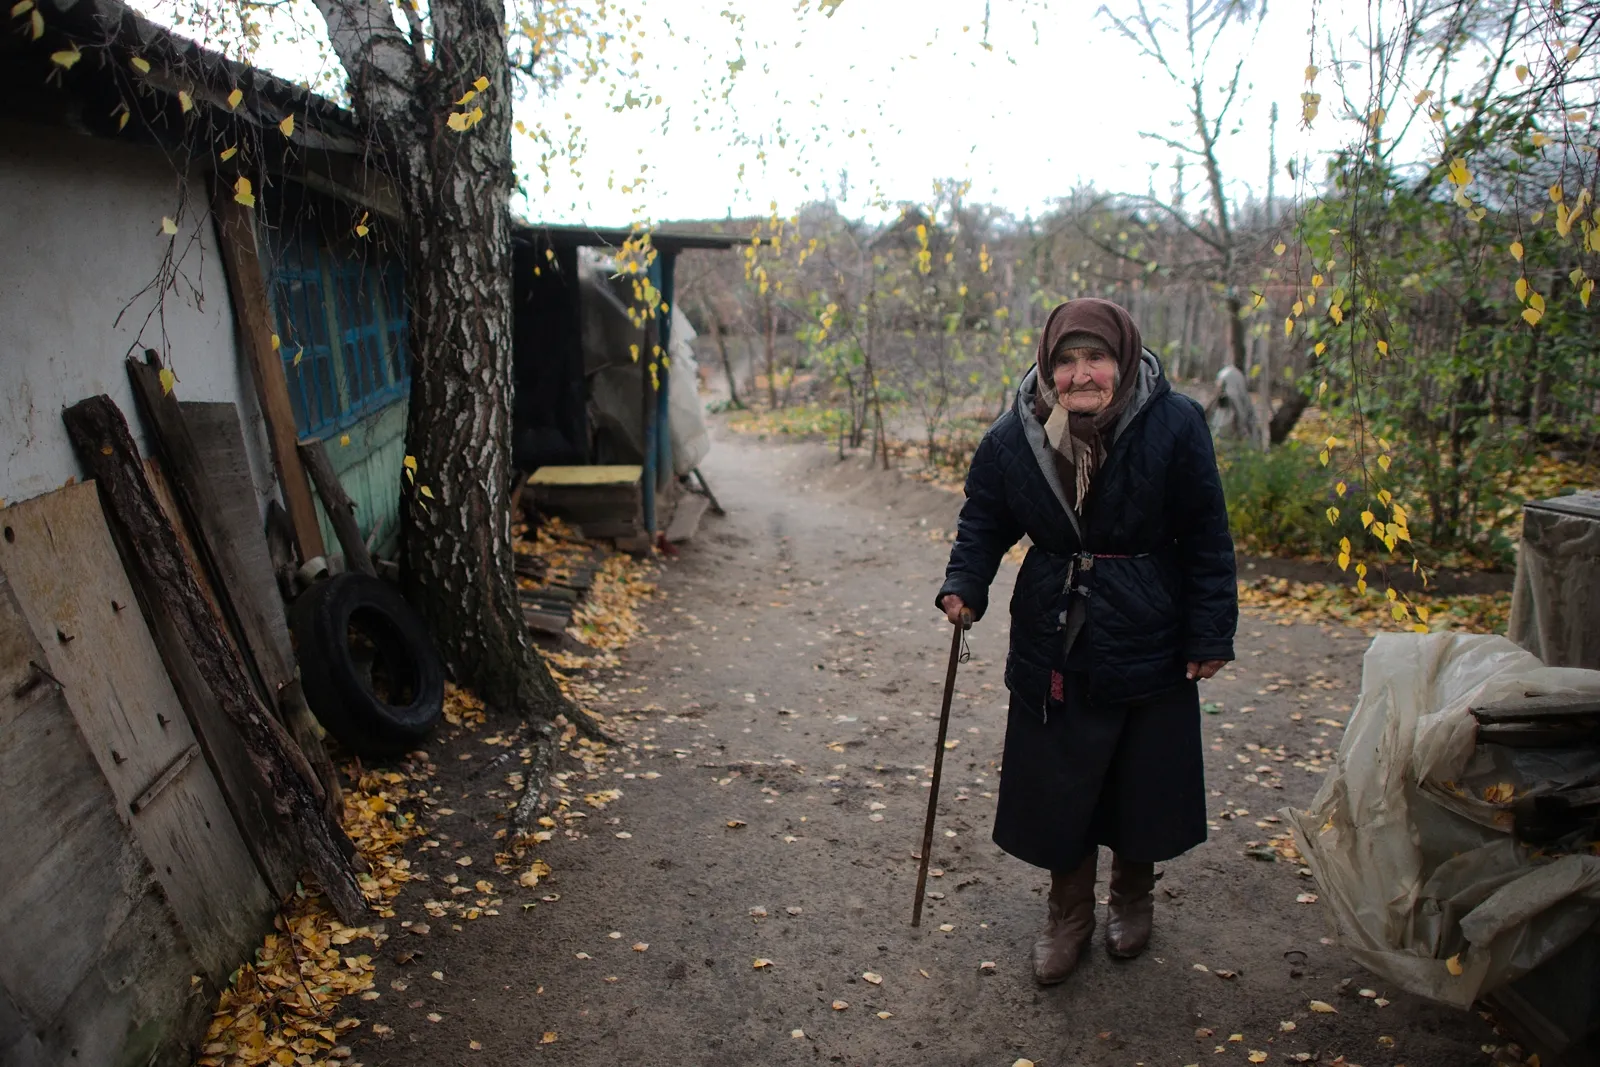 an elderly women walks on the street while holding a cane.